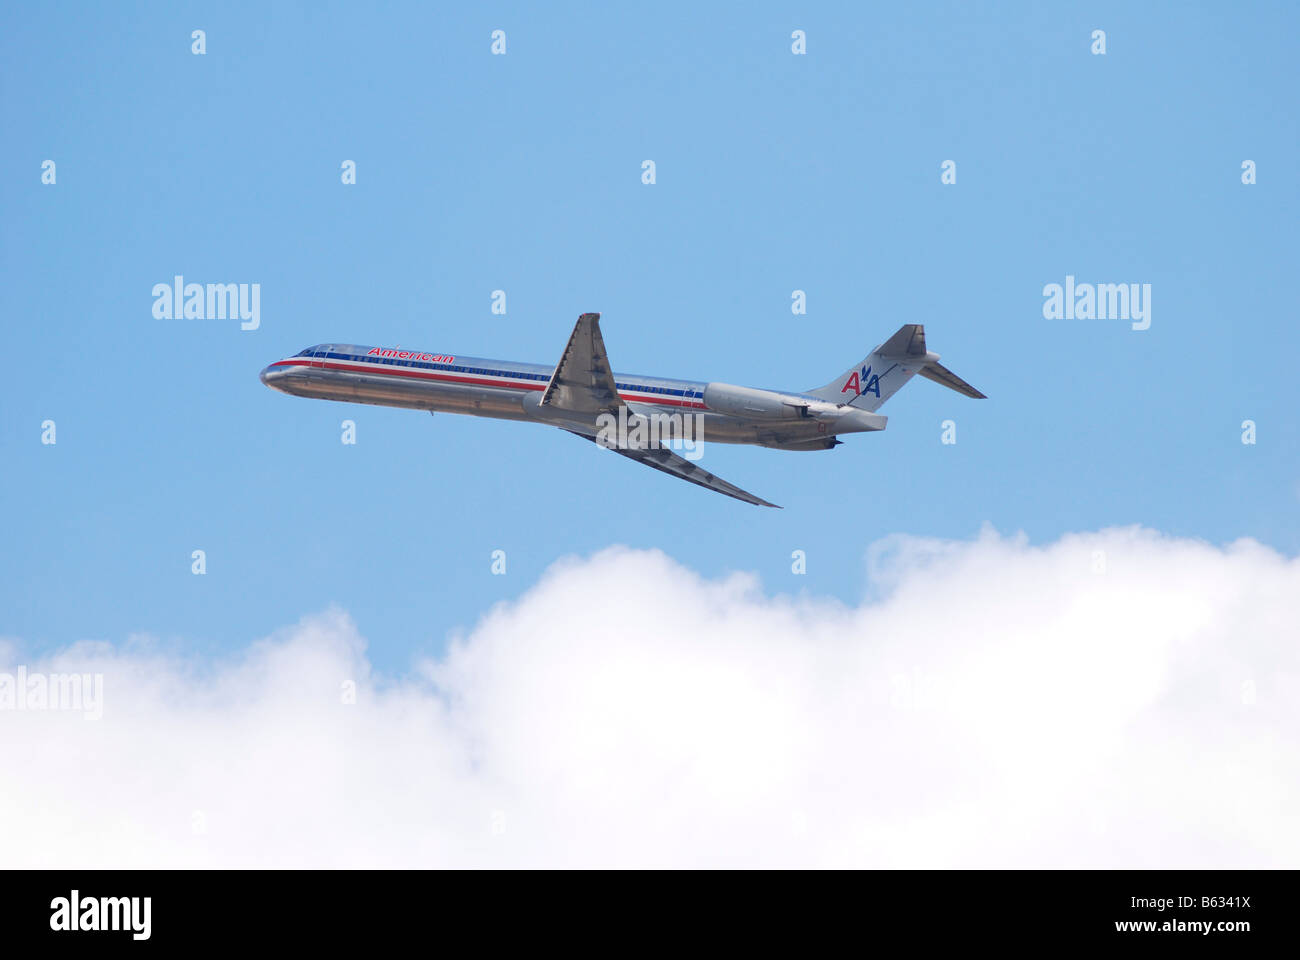 American Airlines Jet airplane flying above the clouds Stock Photo